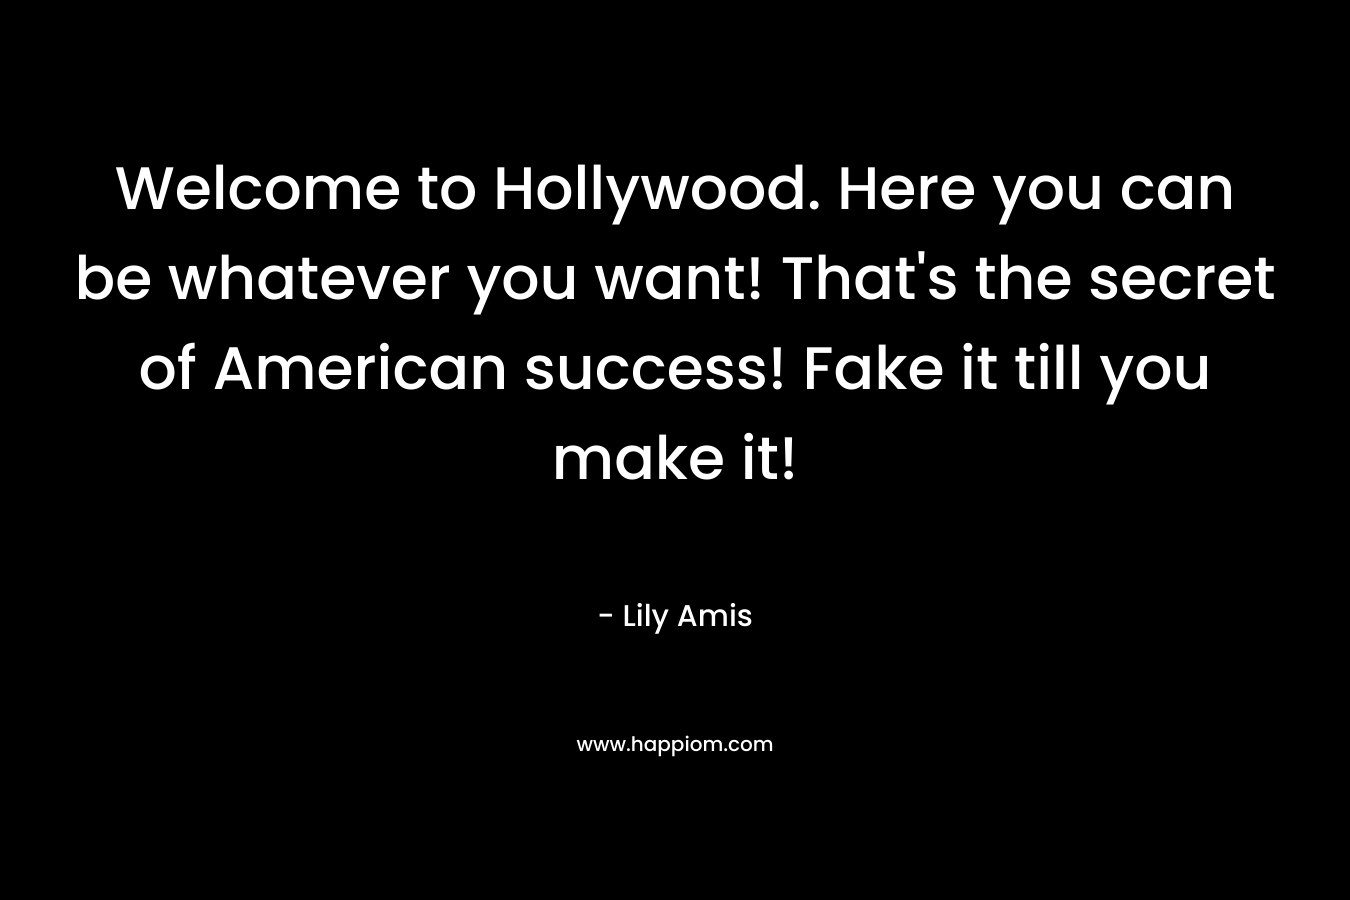 Welcome to Hollywood. Here you can be whatever you want! That's the secret of American success! Fake it till you make it!